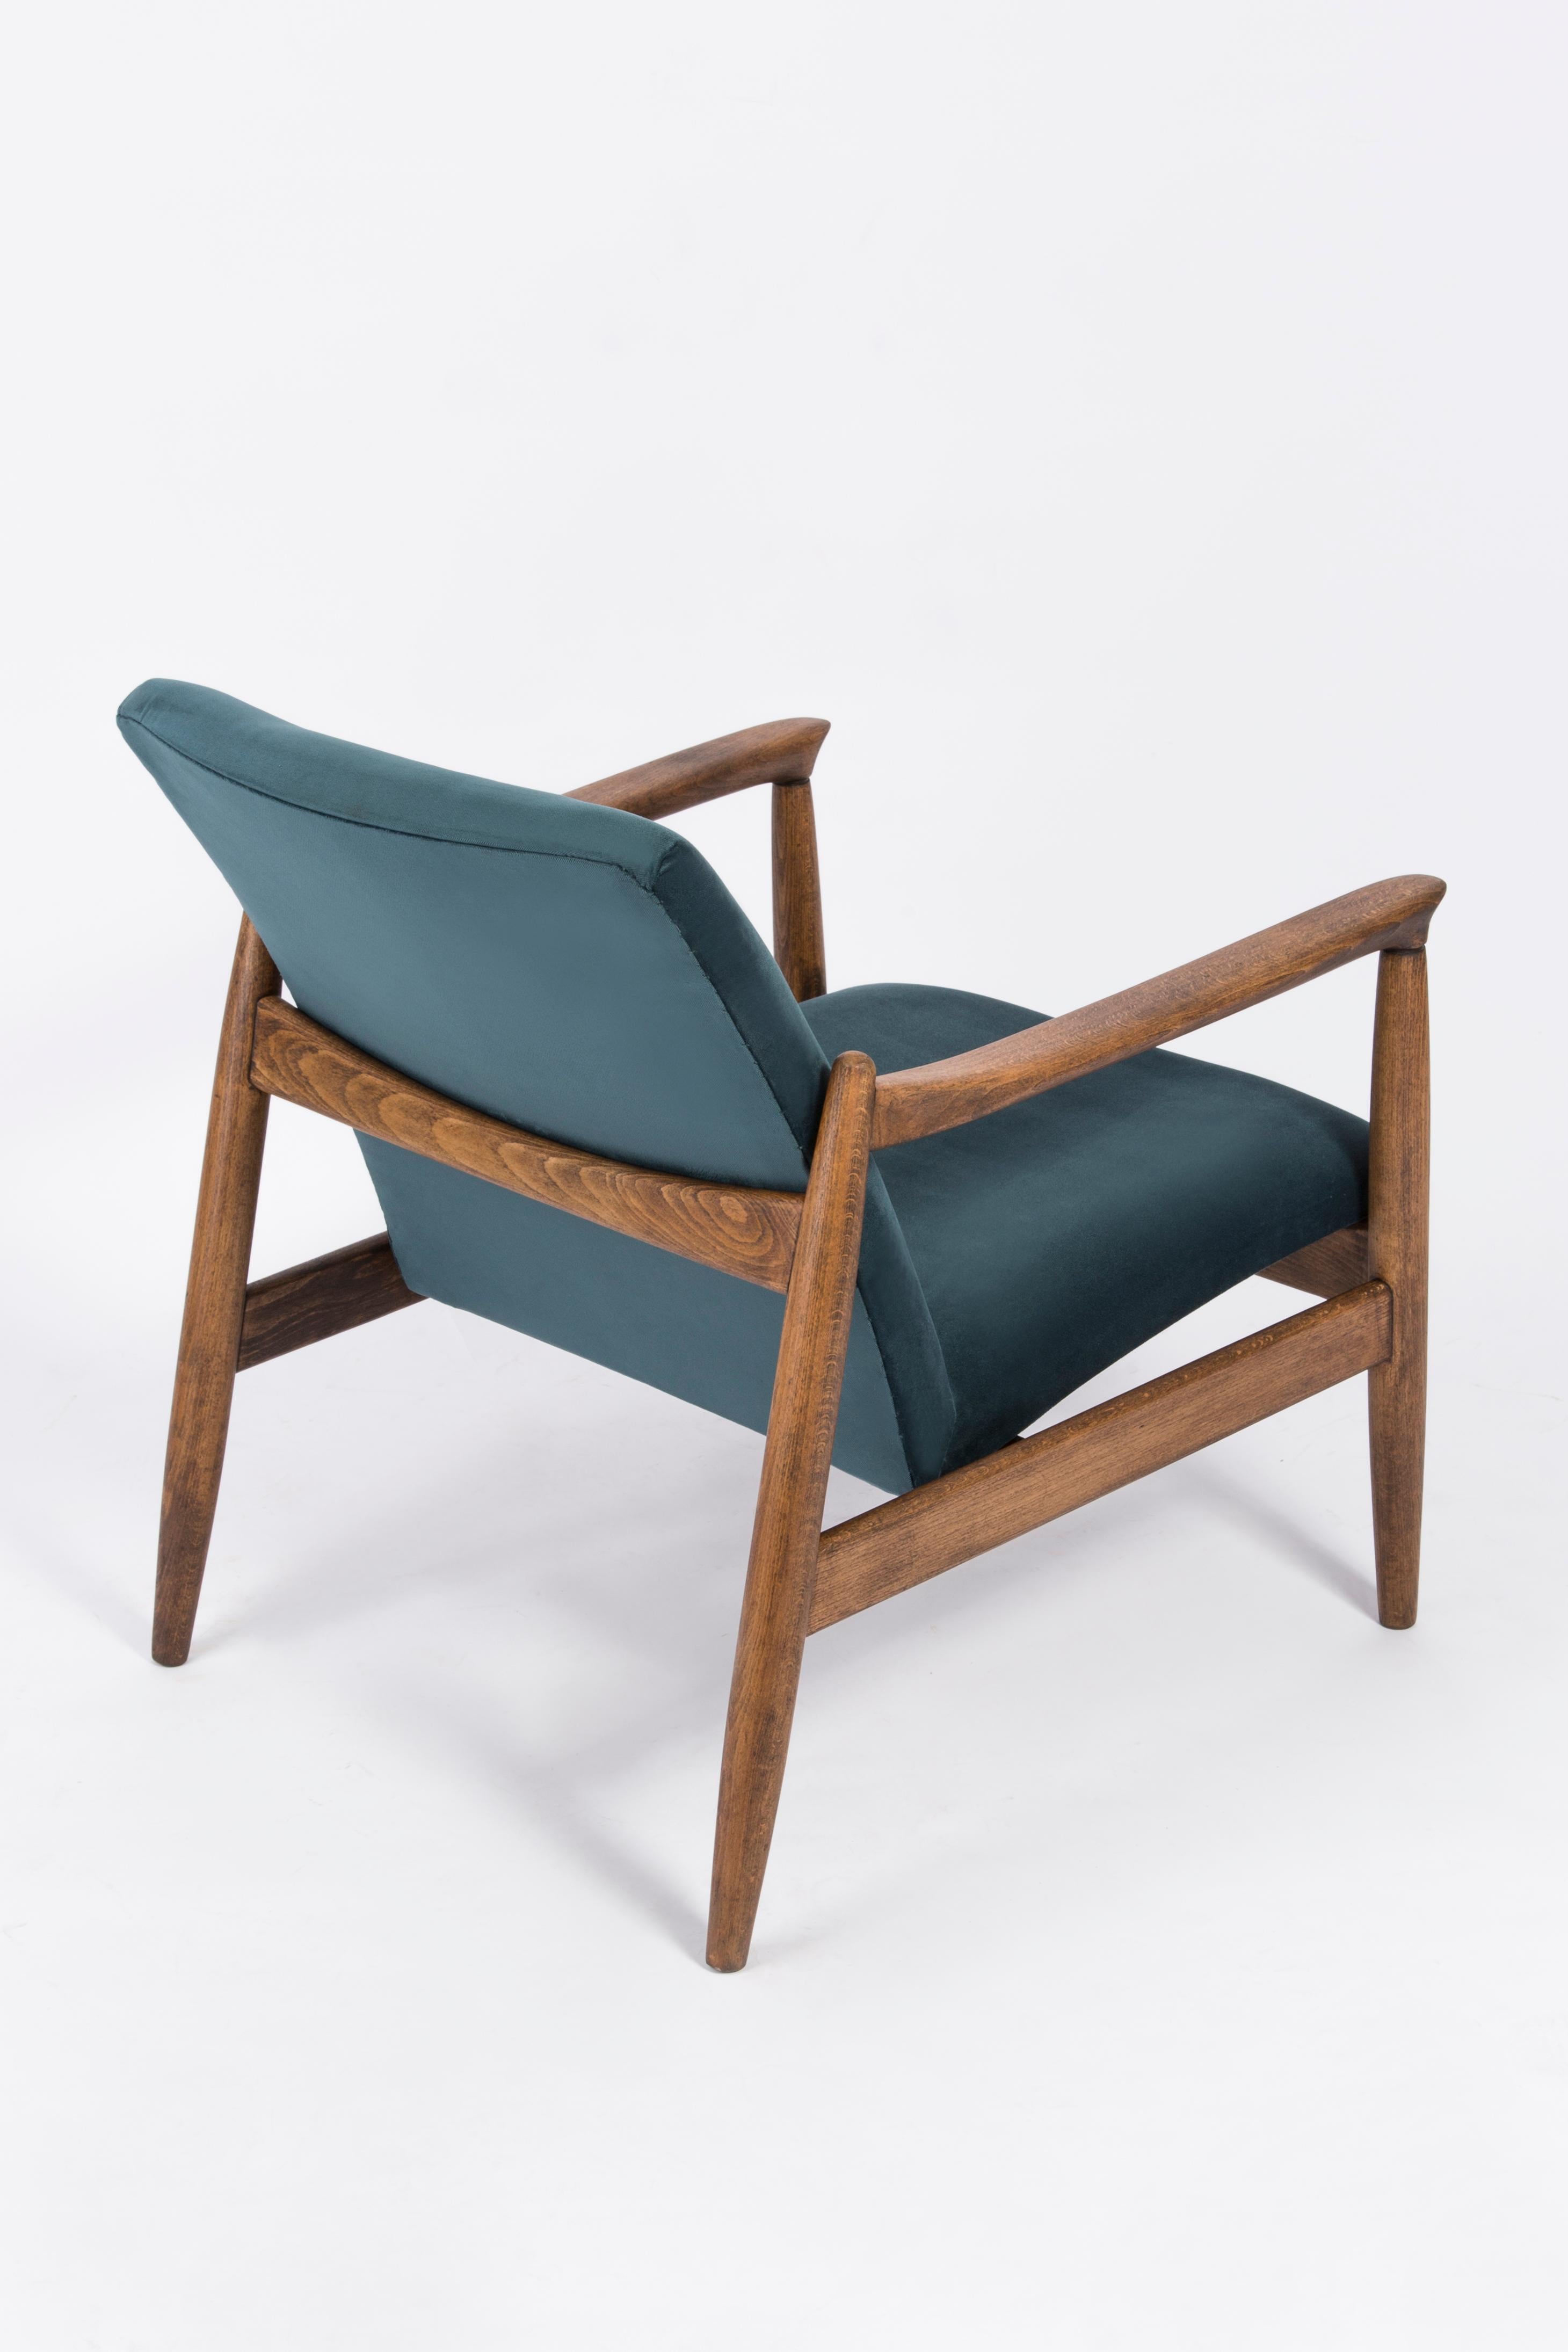 Petrol blue armchair, designed by Edmund Homa. The armchair was made in the 1960s in the Gosciecinska Furniture Factory from solid beechwood. The GFM type armchair is regarded one of the best Polish armchair design from the previous age. The